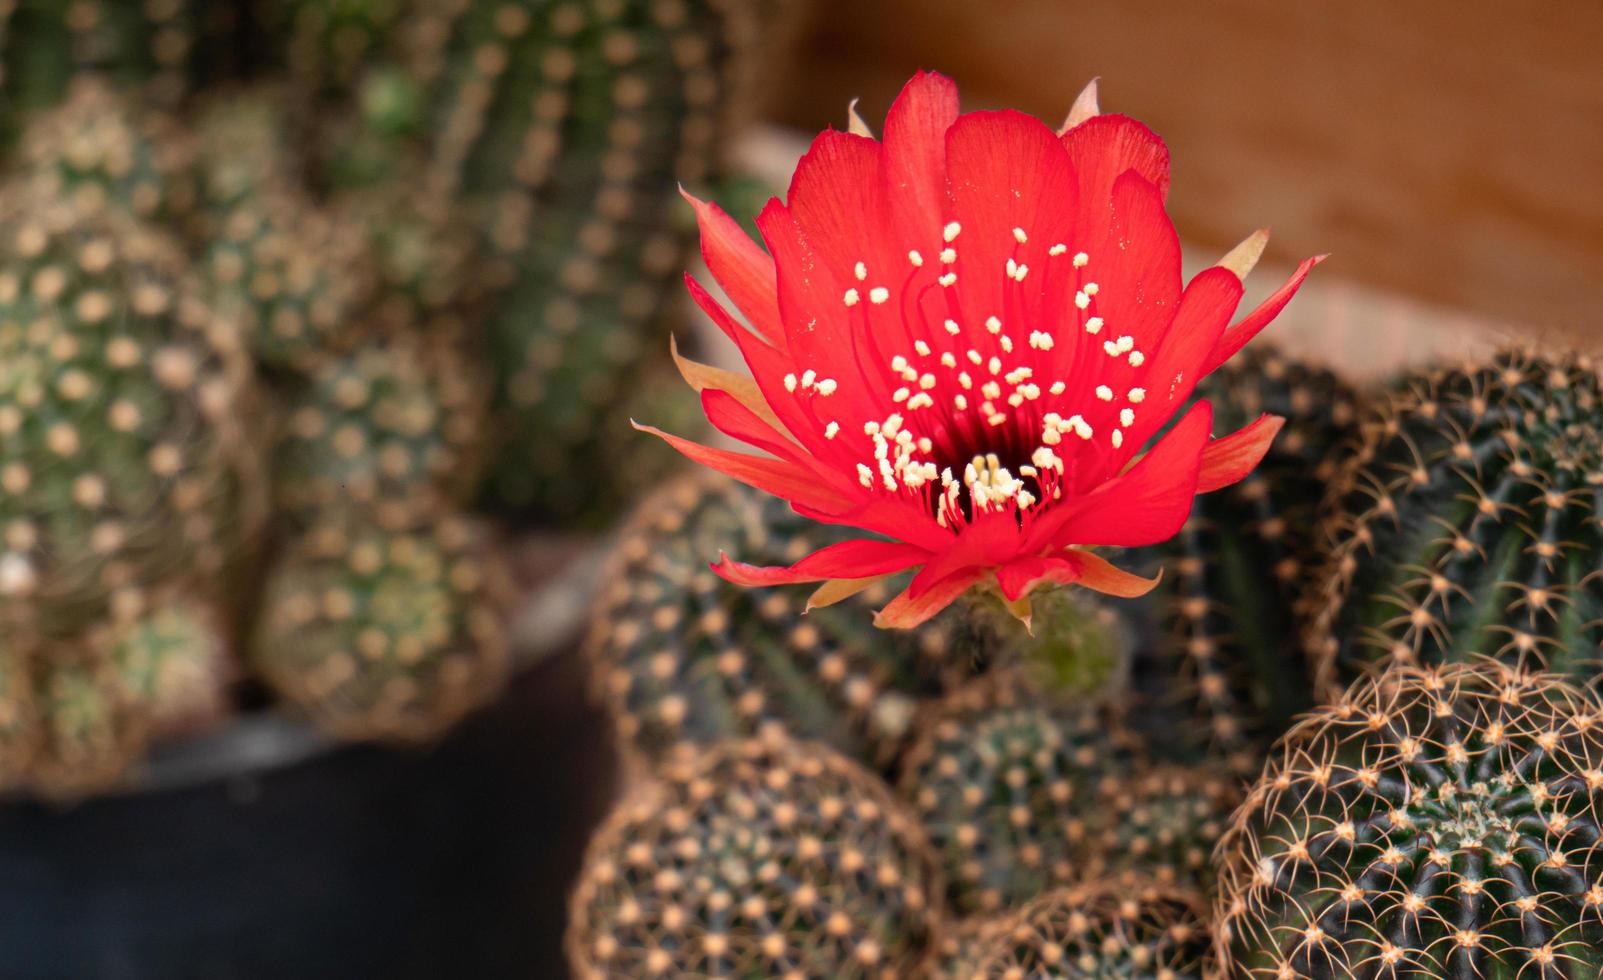 Red flowers from the cactus plant. Flowers blooming on cacti in small pots. photo